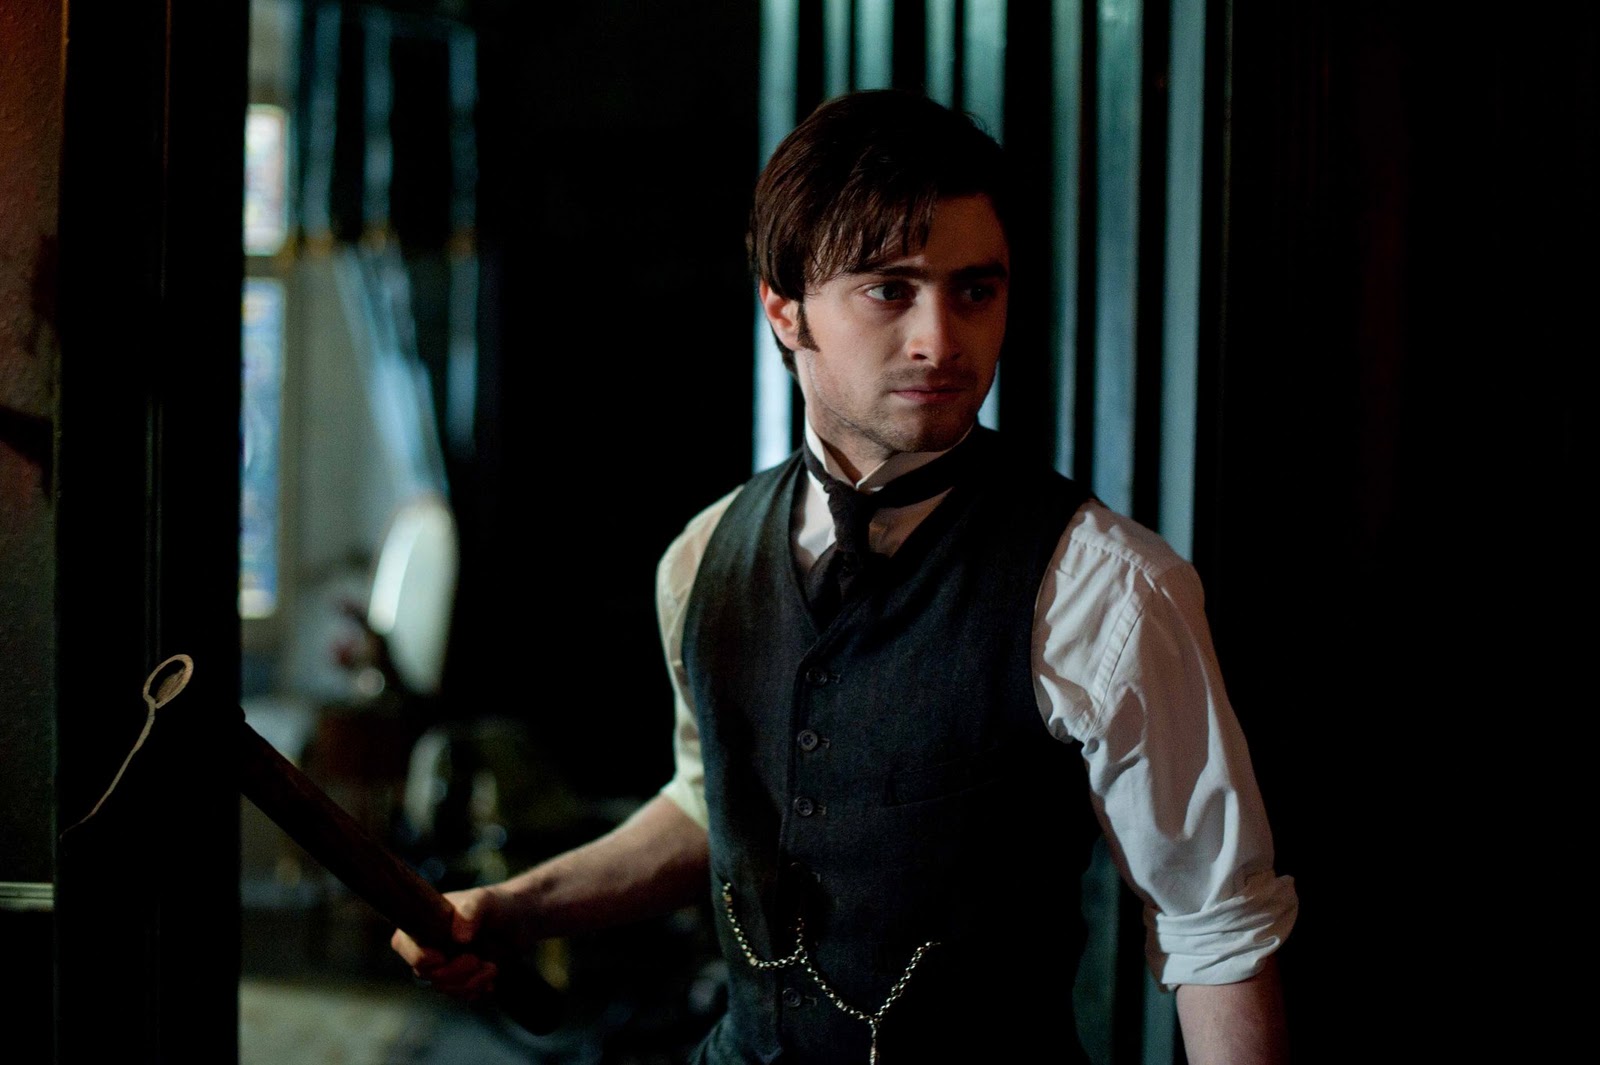 Daniel Radcliffe Spooked In New 'The Woman in Black' Trailer1600 x 1065